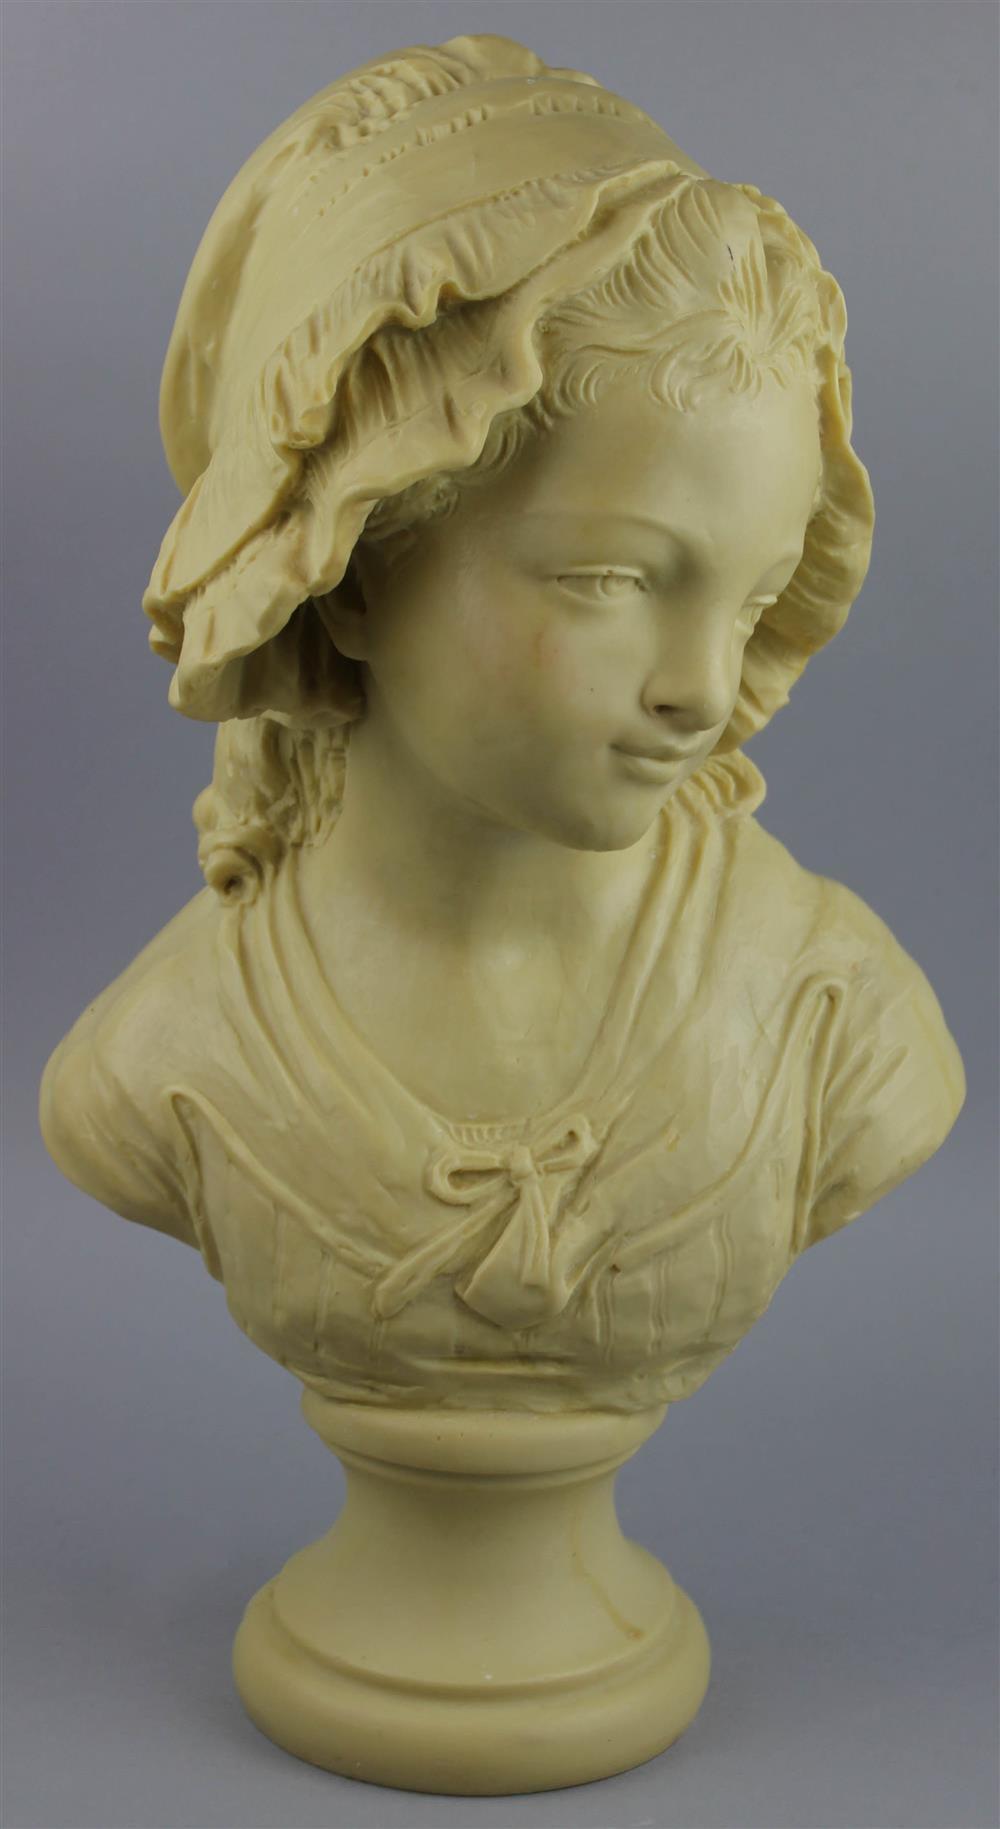 AFTER GRINAM NIAM, BUST OF YOUNG